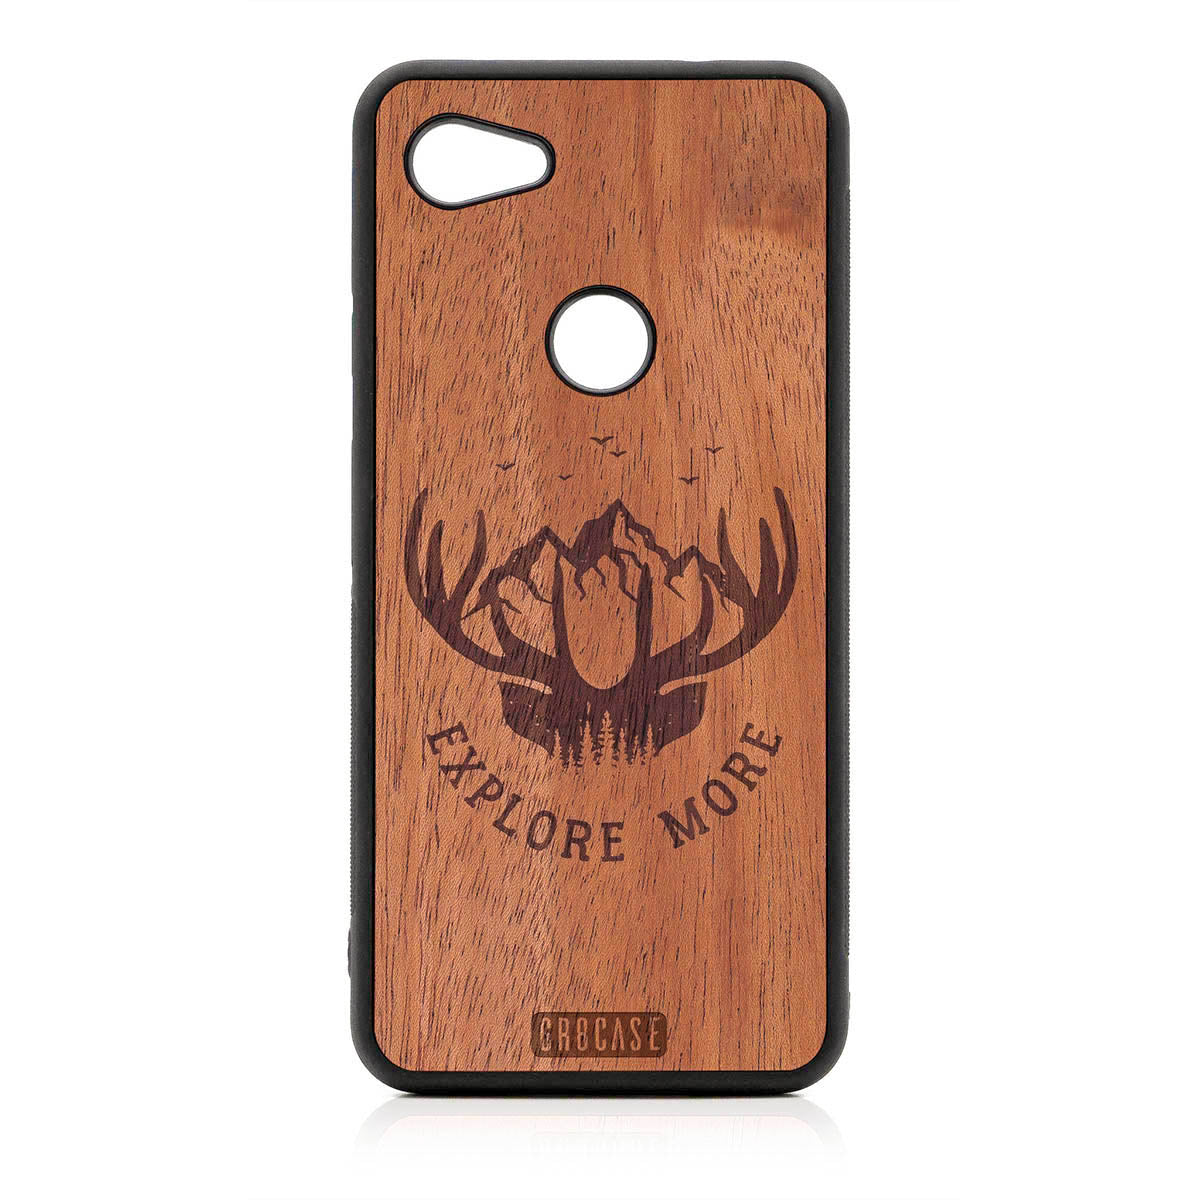 Explore More (Forest, Mountains & Antlers) Design Wood Case For Google Pixel 3A by GR8CASE